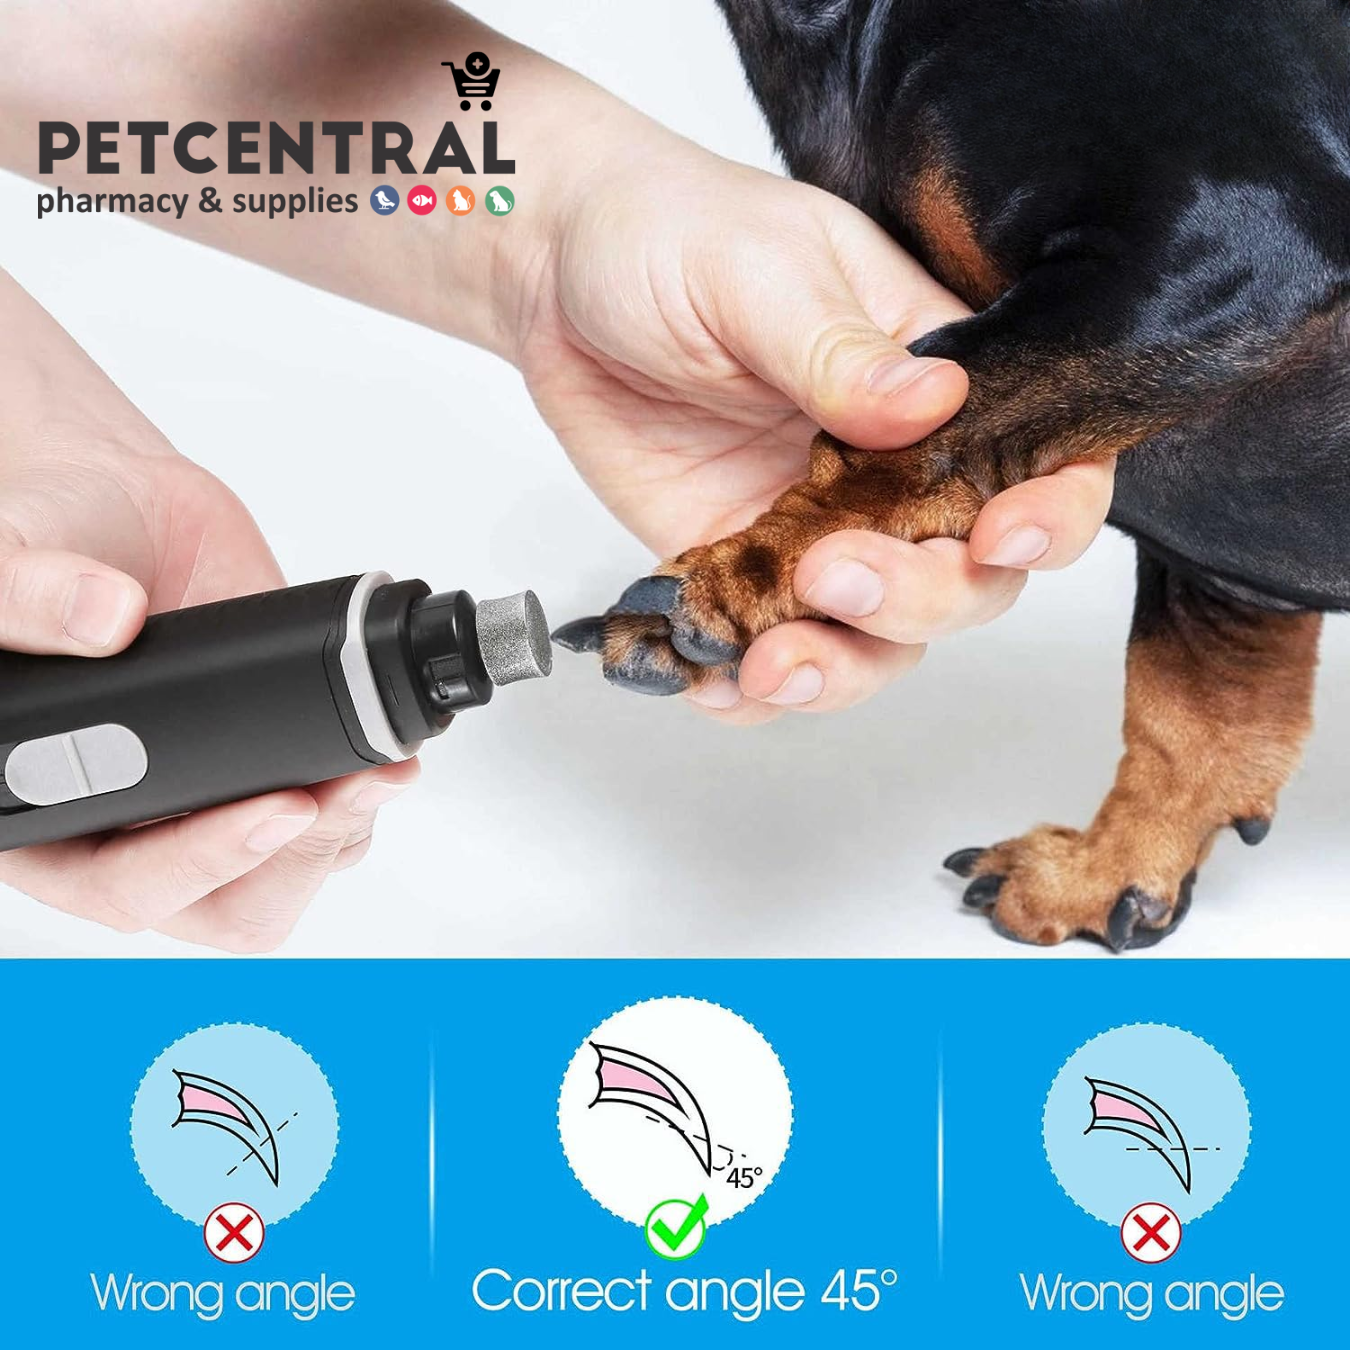 Dog Nail Grinder, Pets Electric Nail Trimmer Clipper for Dogs Cats and  Small Medium Pets, Rechargeable and Portable – Includes USB Wire –  shopsmartonamazon.com